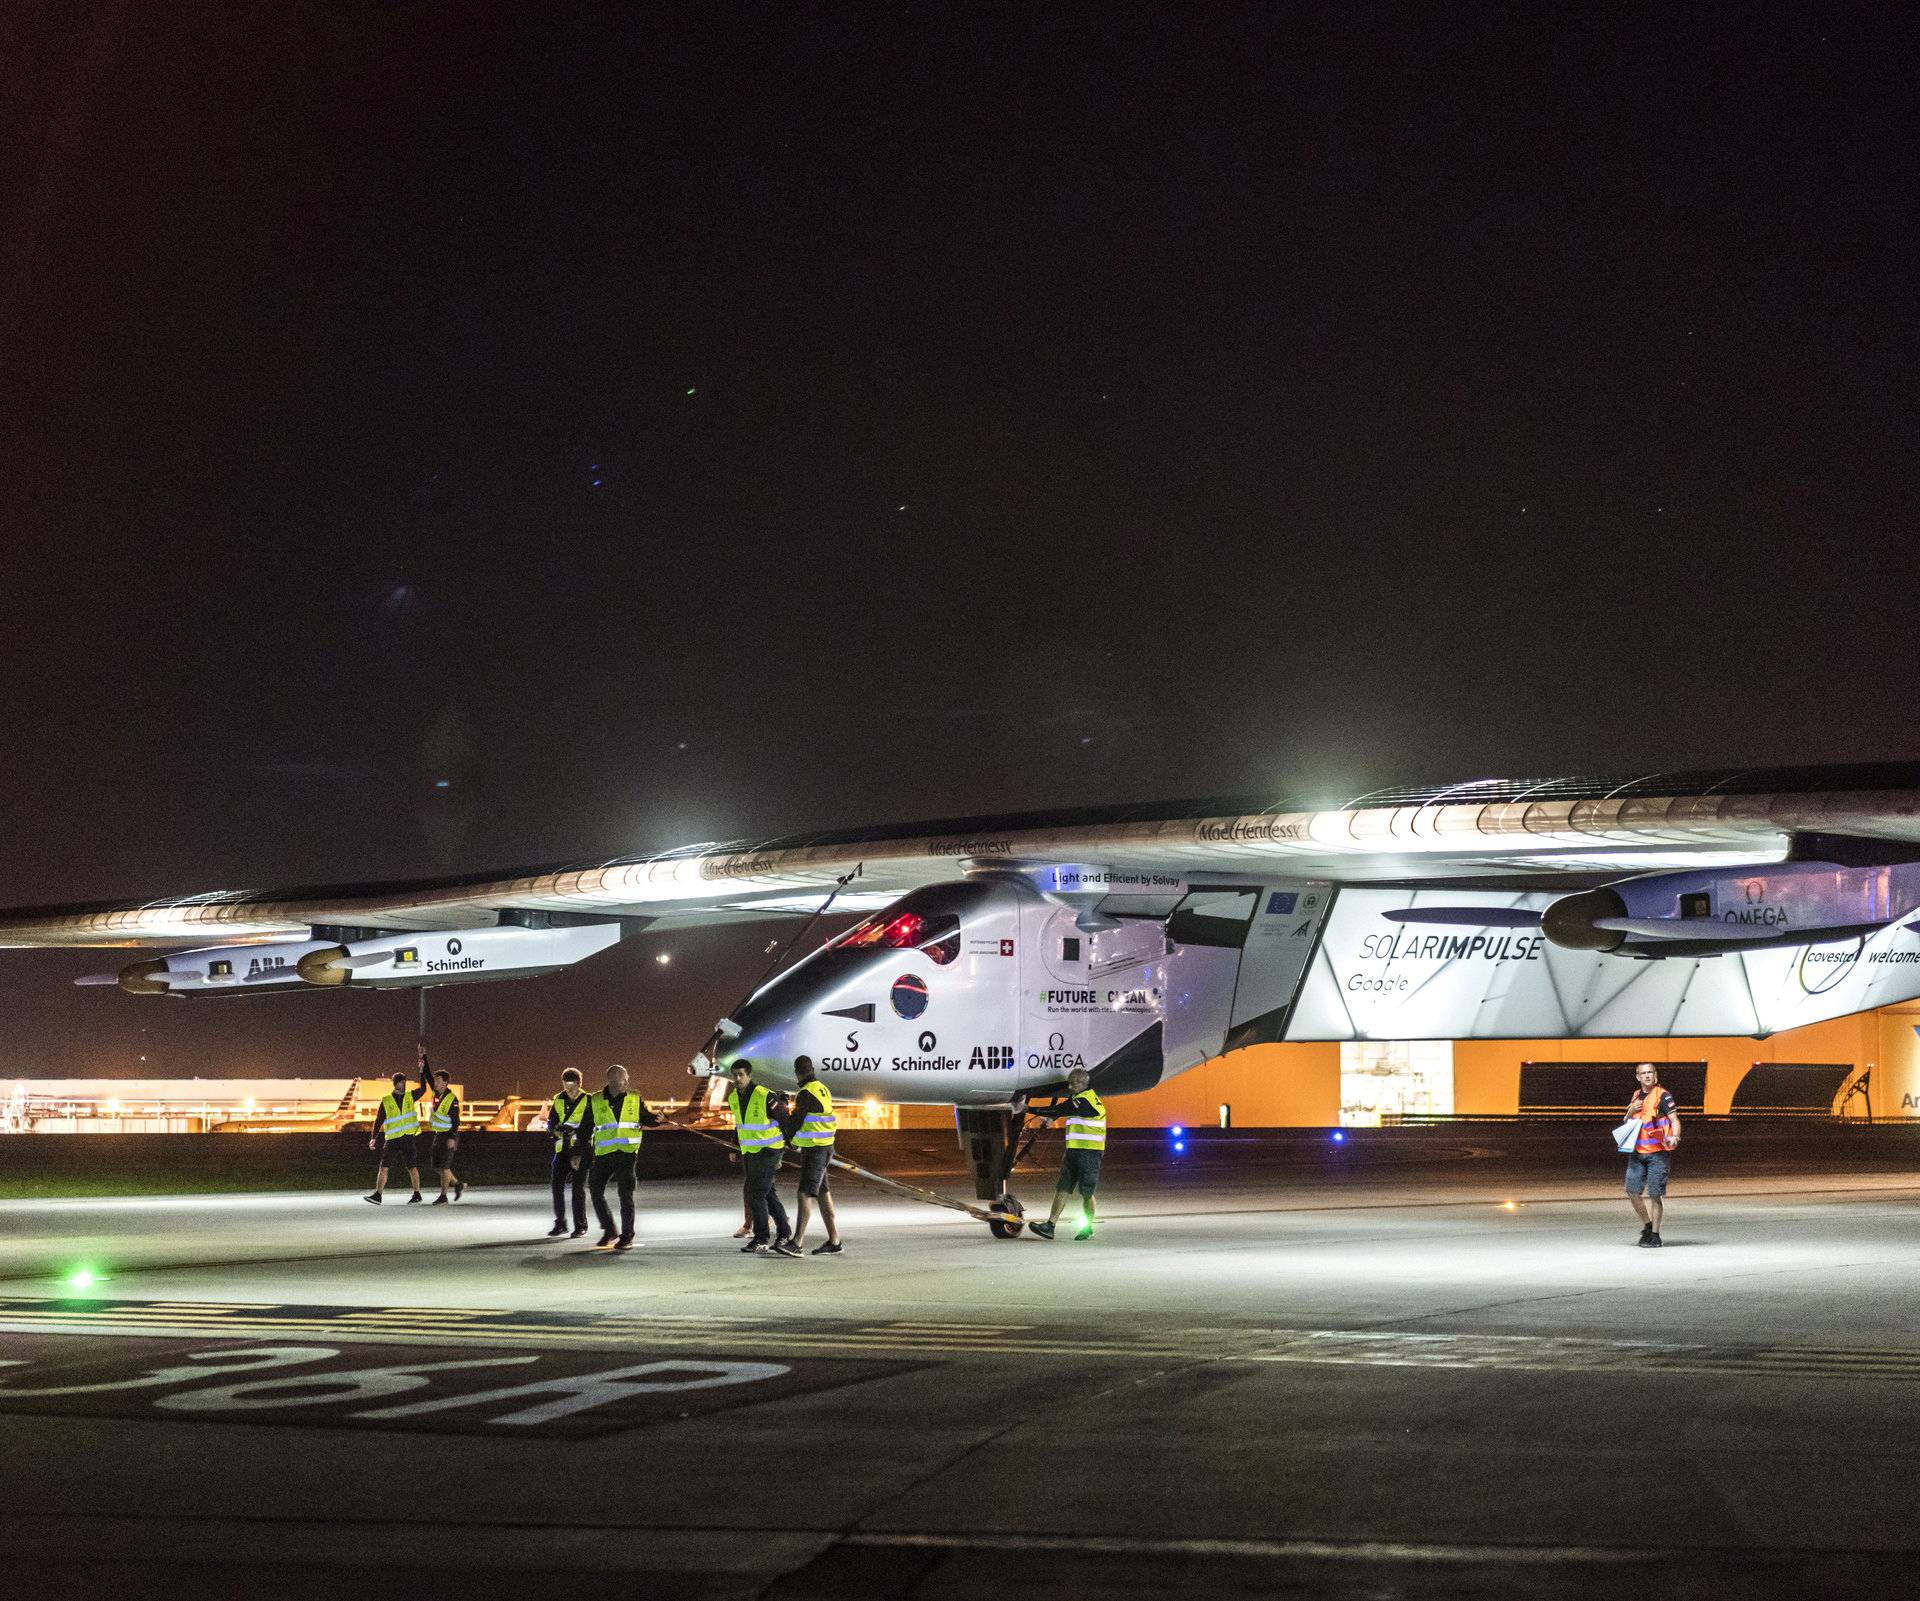 Solar Impulse 2, the solar-powered plane, is pictured after landing at Tulsa International Airport